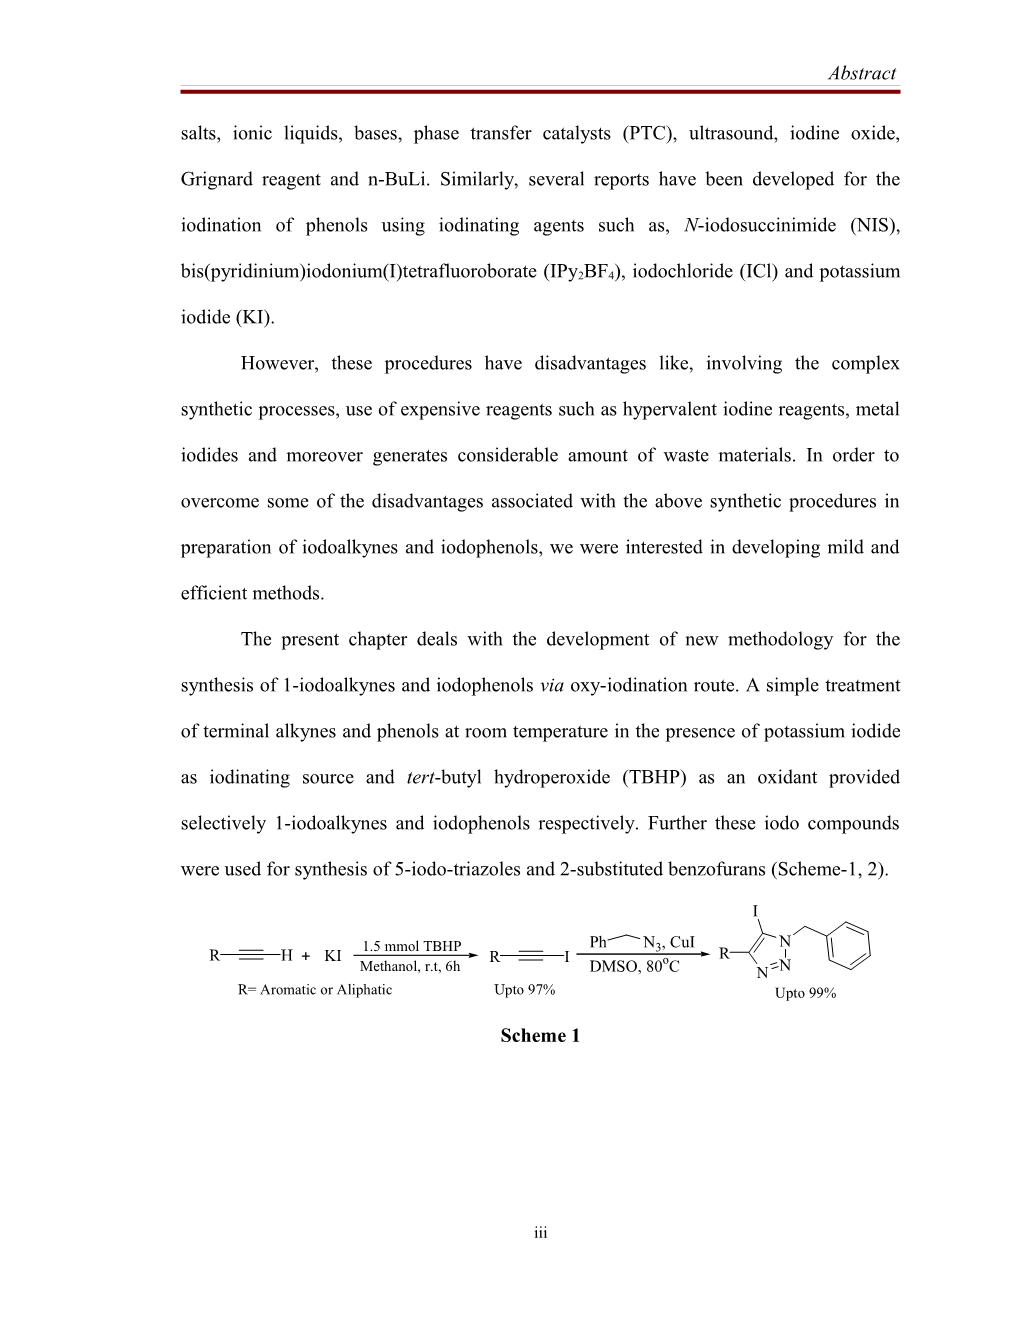 Electrophilic Iodination of Electron Rich Aromatics and Alkynes Their Application in The